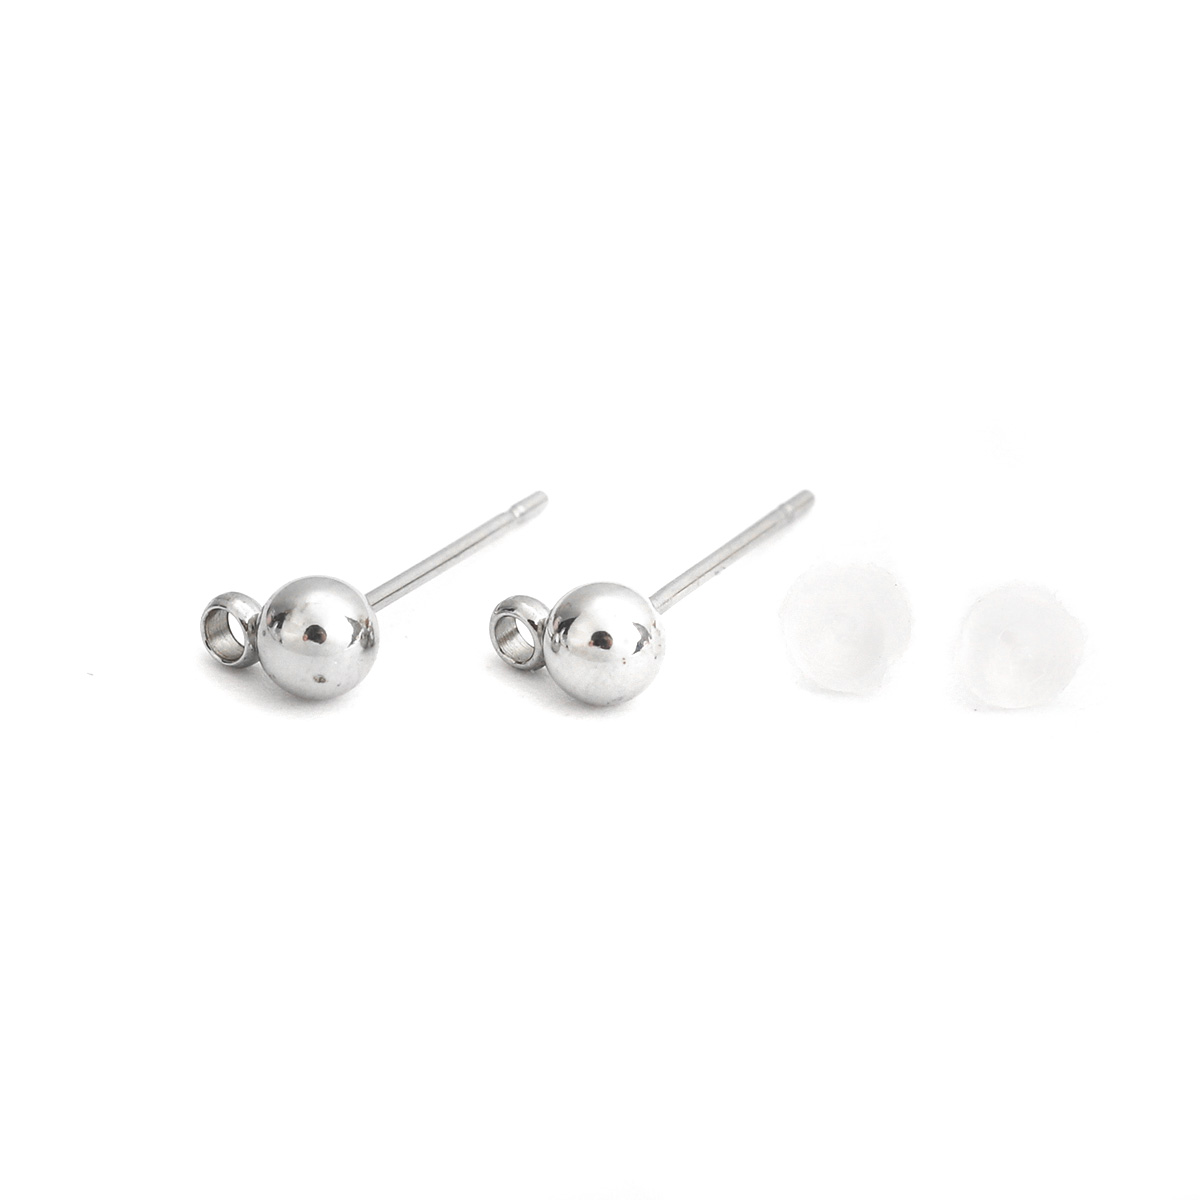 Picture of Stainless Steel Ear Post Stud Earrings Round Silver Tone W/ Loop 6mm x 4mm, Post/ Wire Size: (21 gauge), 20 PCs